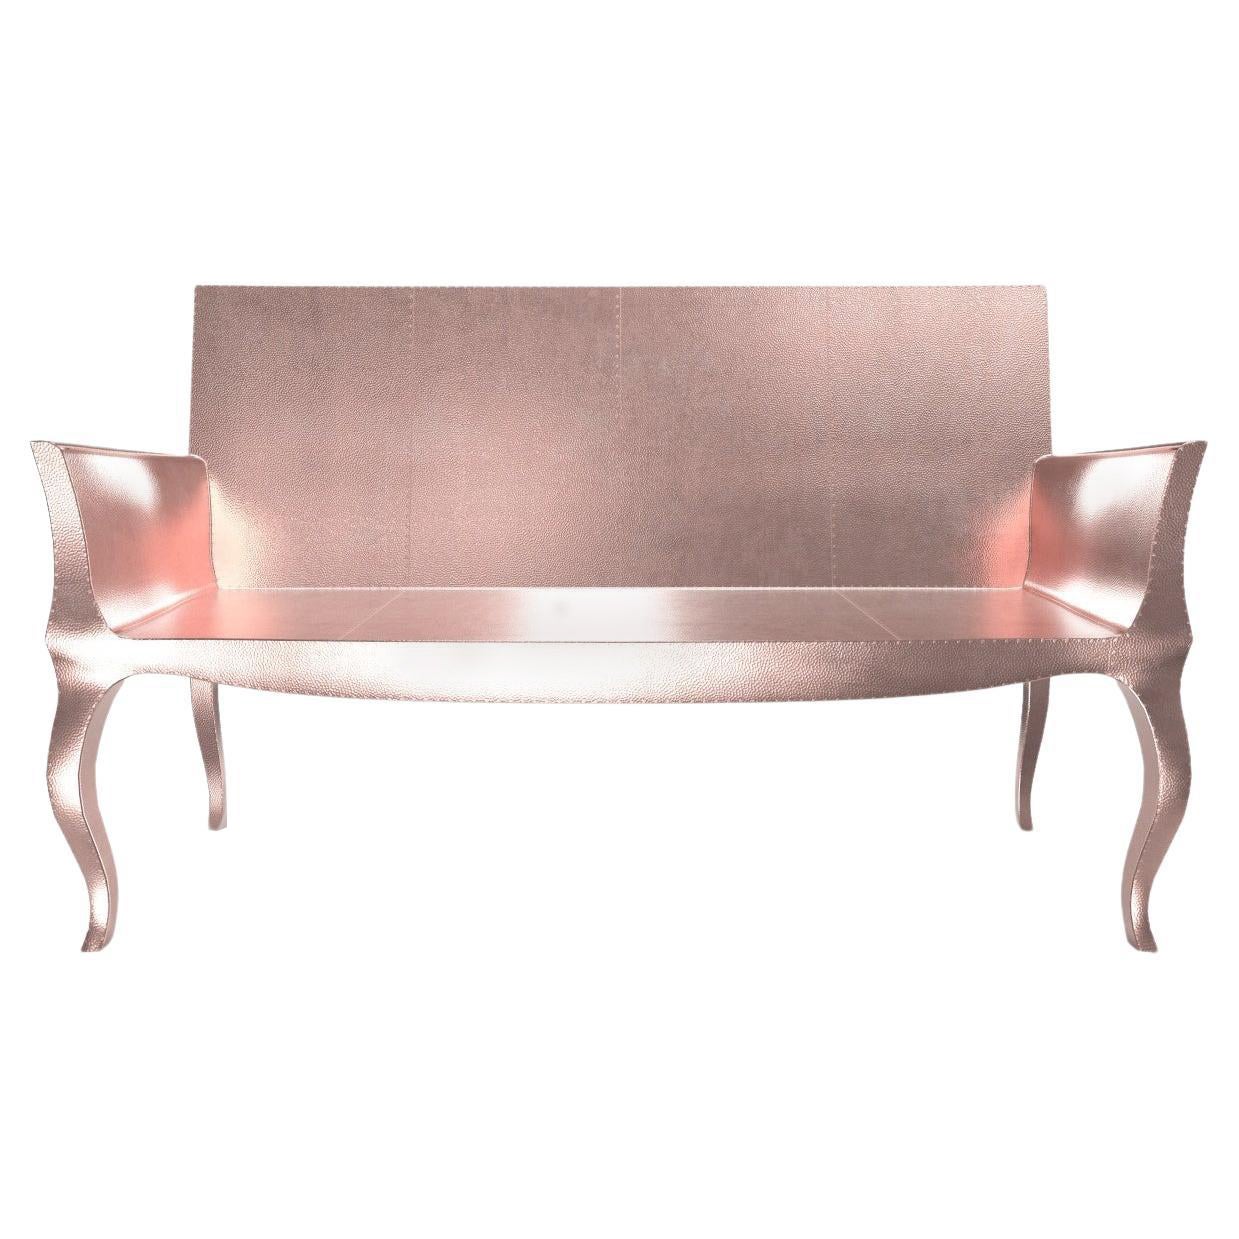 Louise Settee Art Deco Loveseats in Mid. Hammered Copper by Paul Mathieu